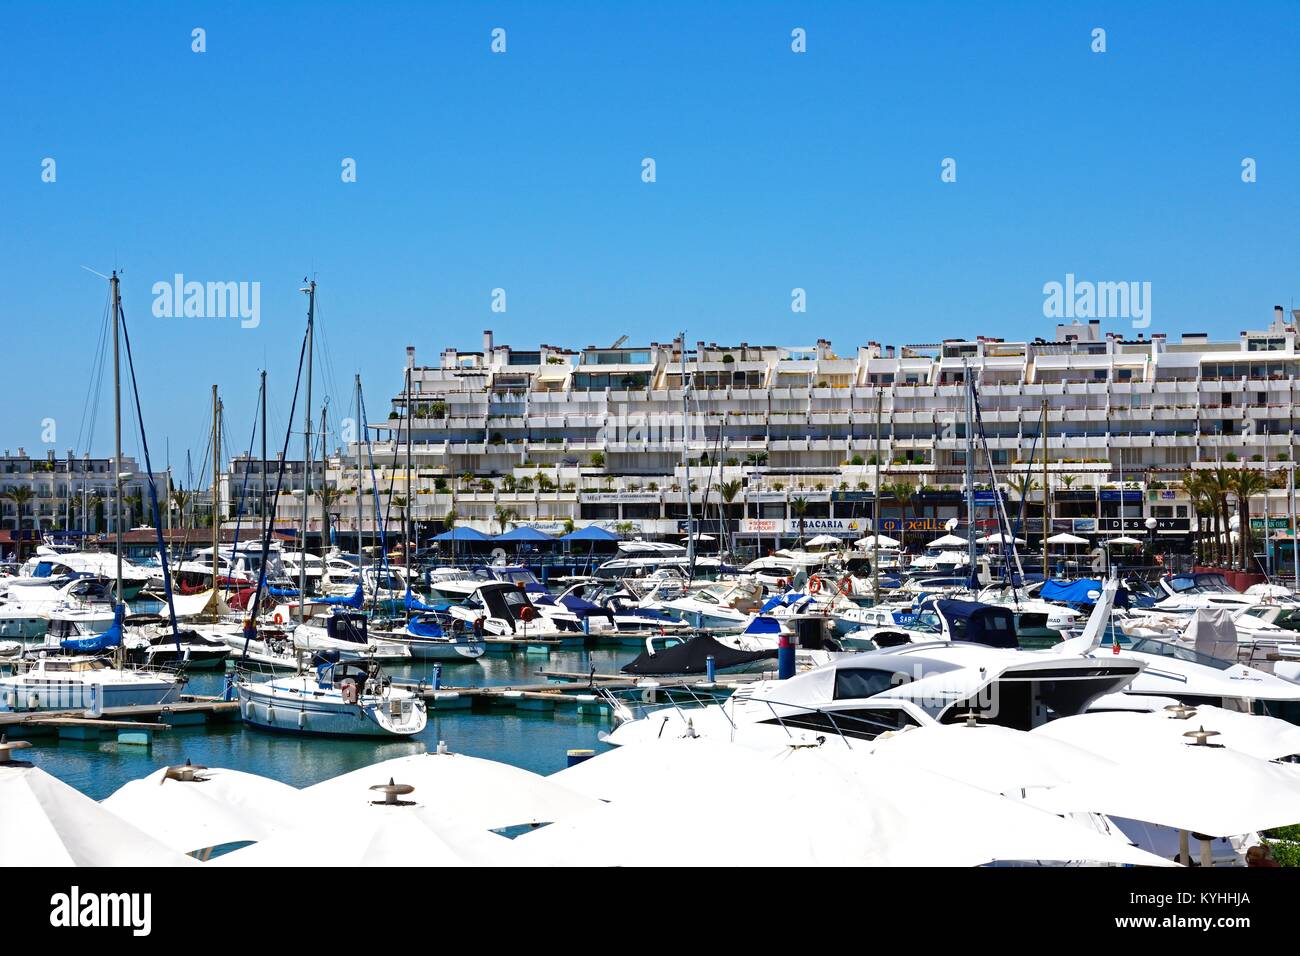 View of yachts in the marina with waterfront shops and restaurants to the rear, Vilamoura, Algarve, Portugal, Europe. Stock Photo